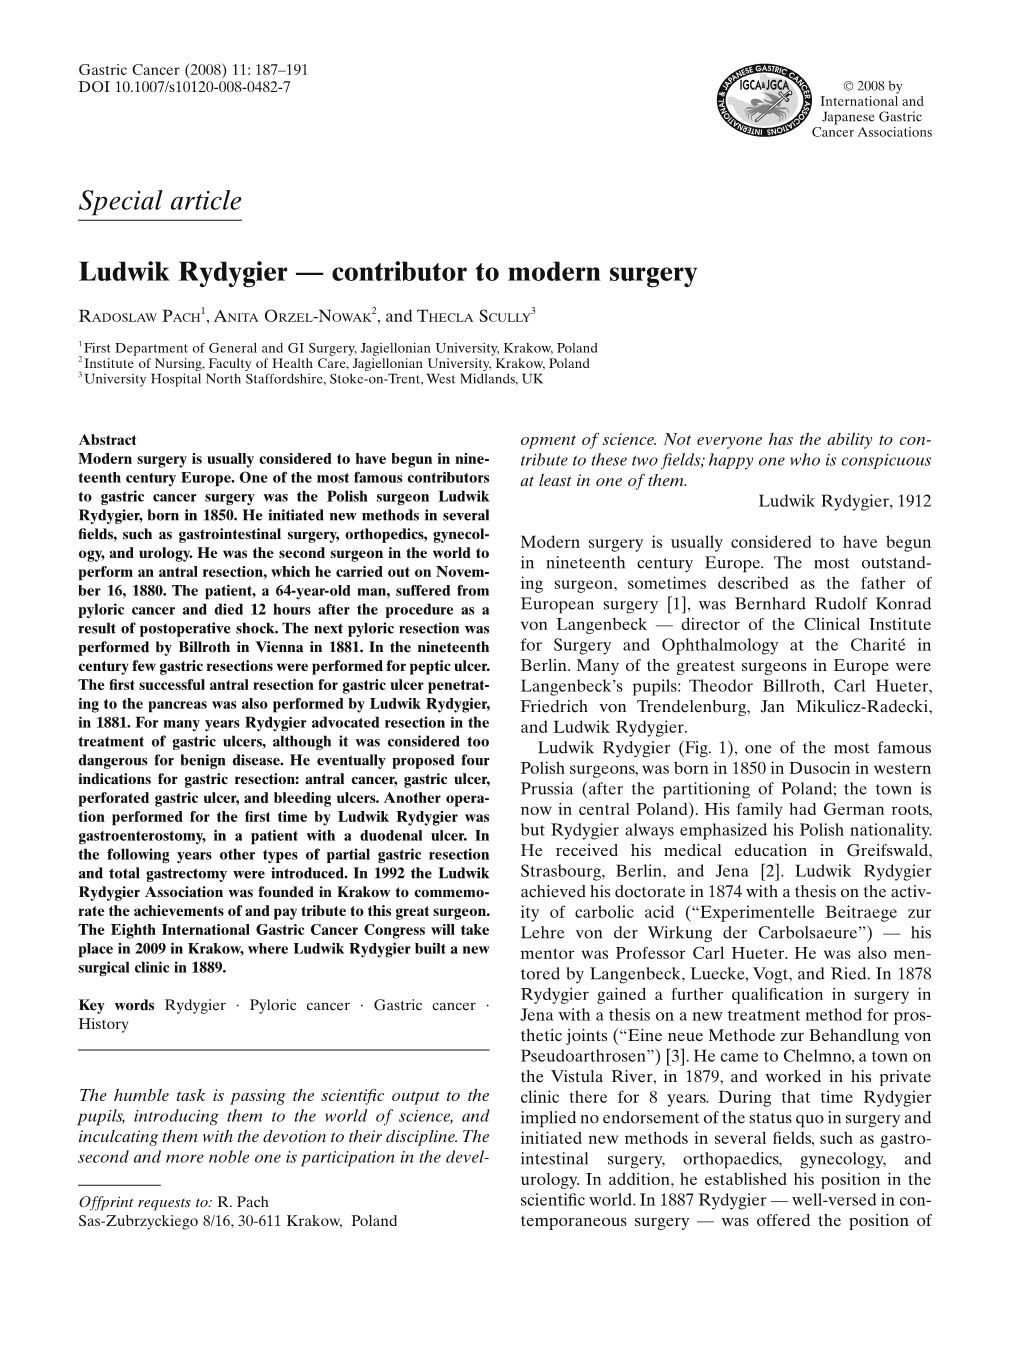 Special Article Ludwik Rydygier — Contributor to Modern Surgery